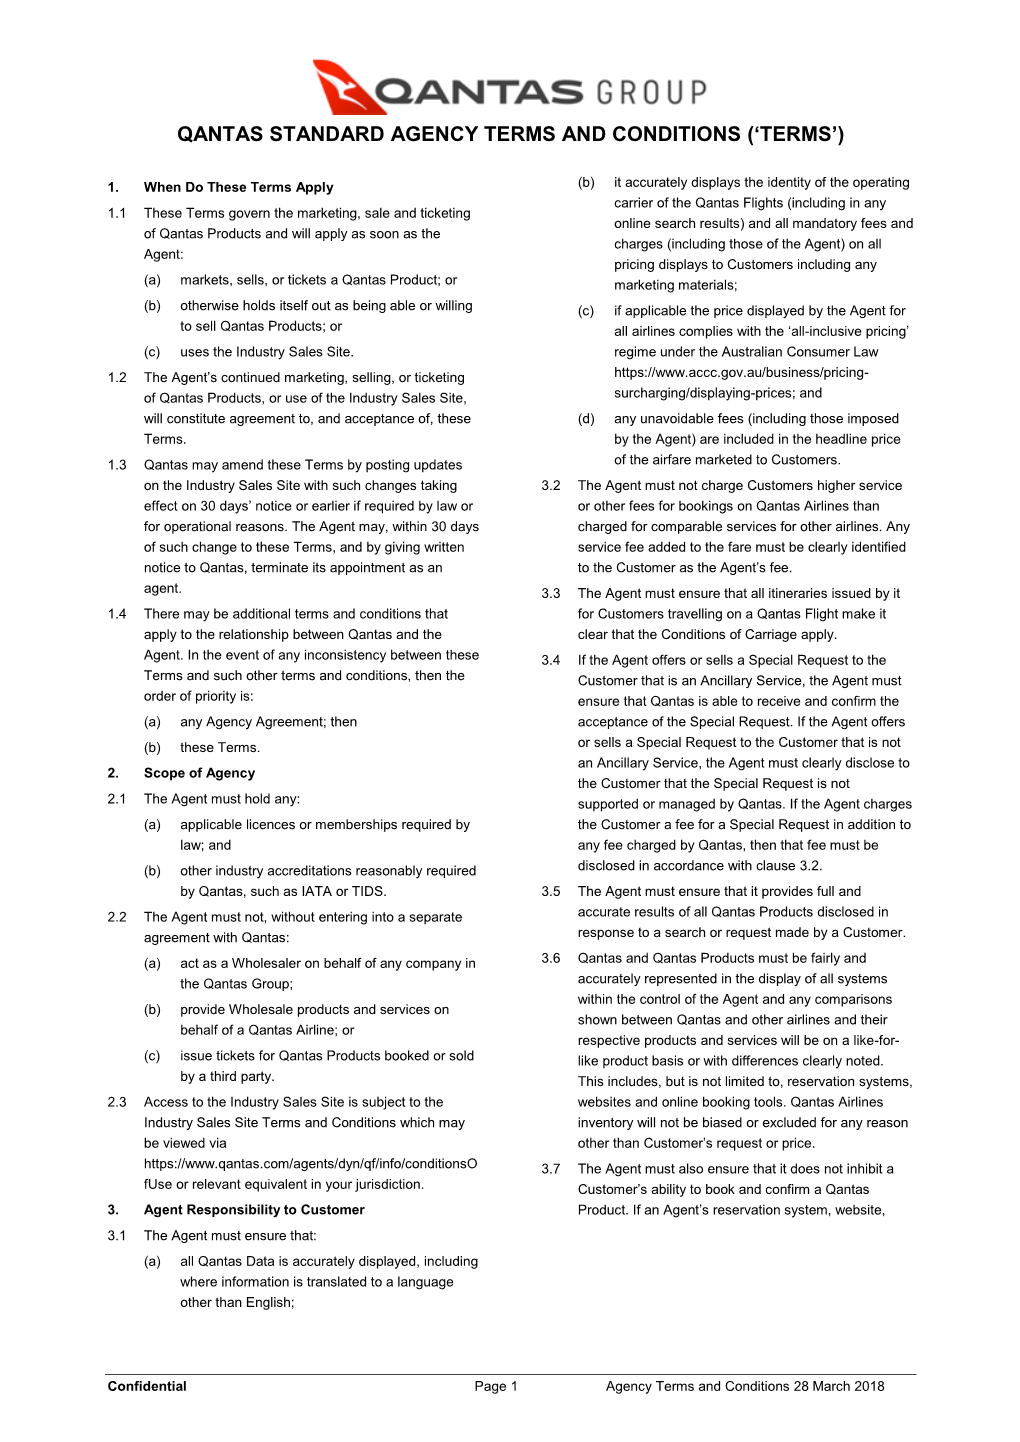 Qantas Standard Agency Terms and Conditions (‘Terms’)